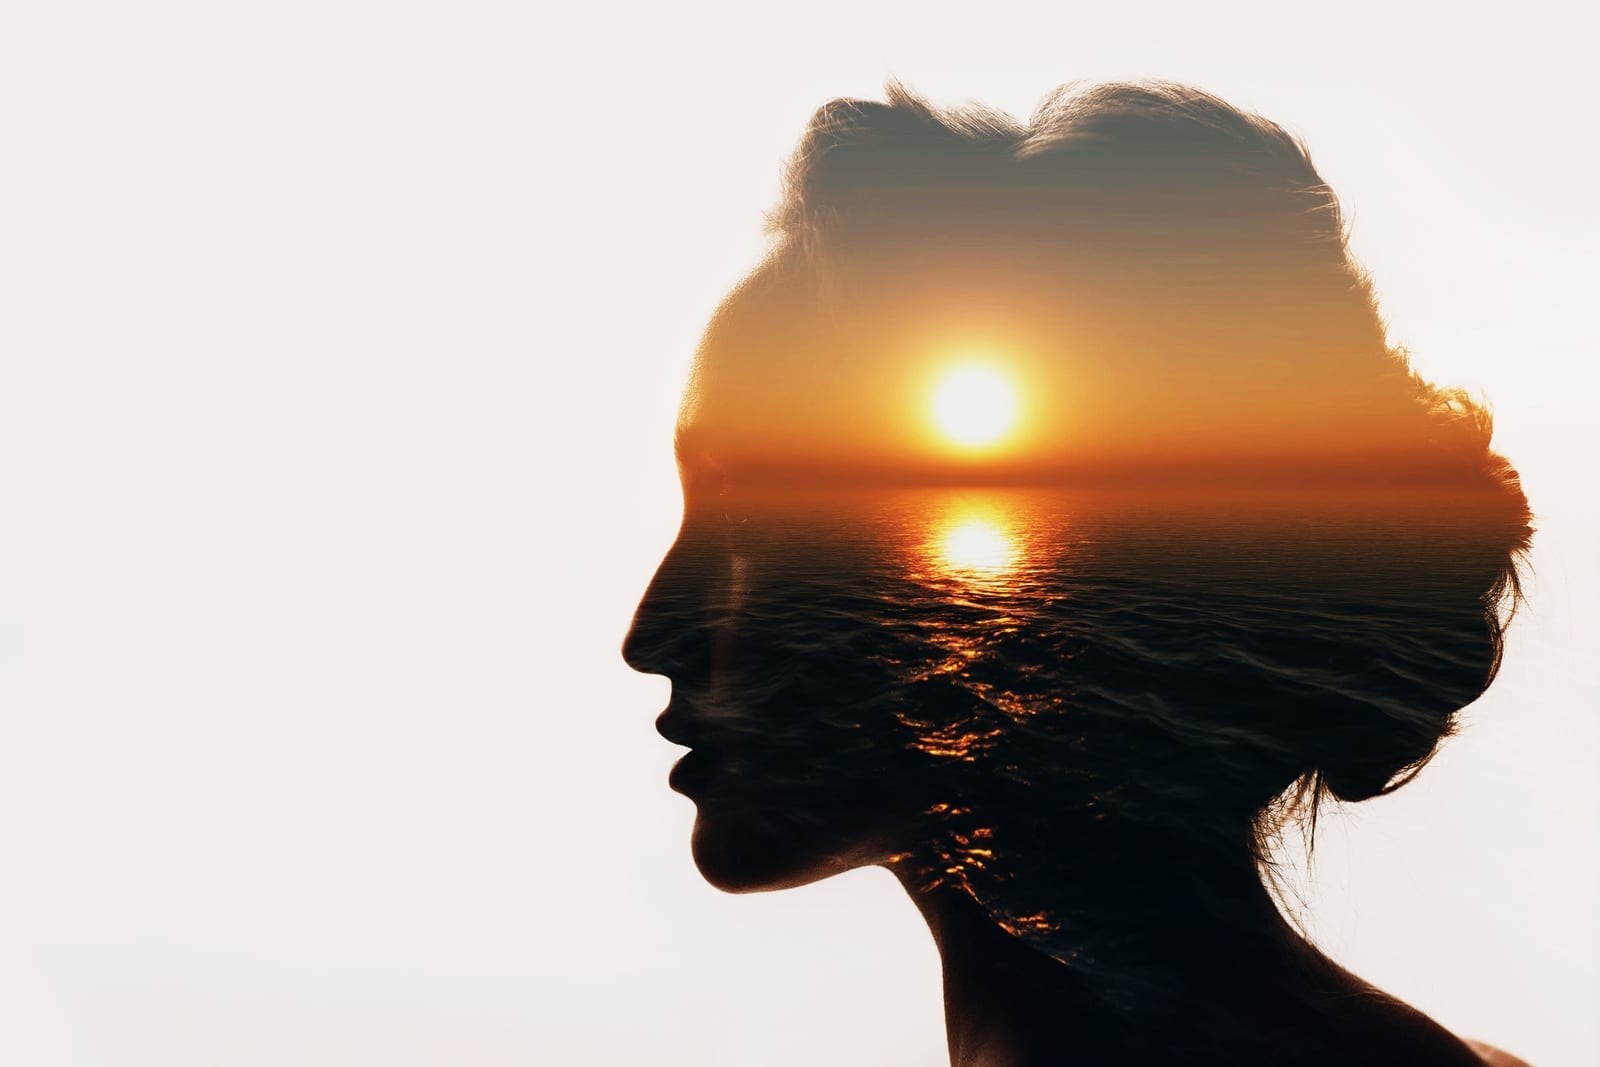 Background image of woman silhouette revealing an ocean sunset